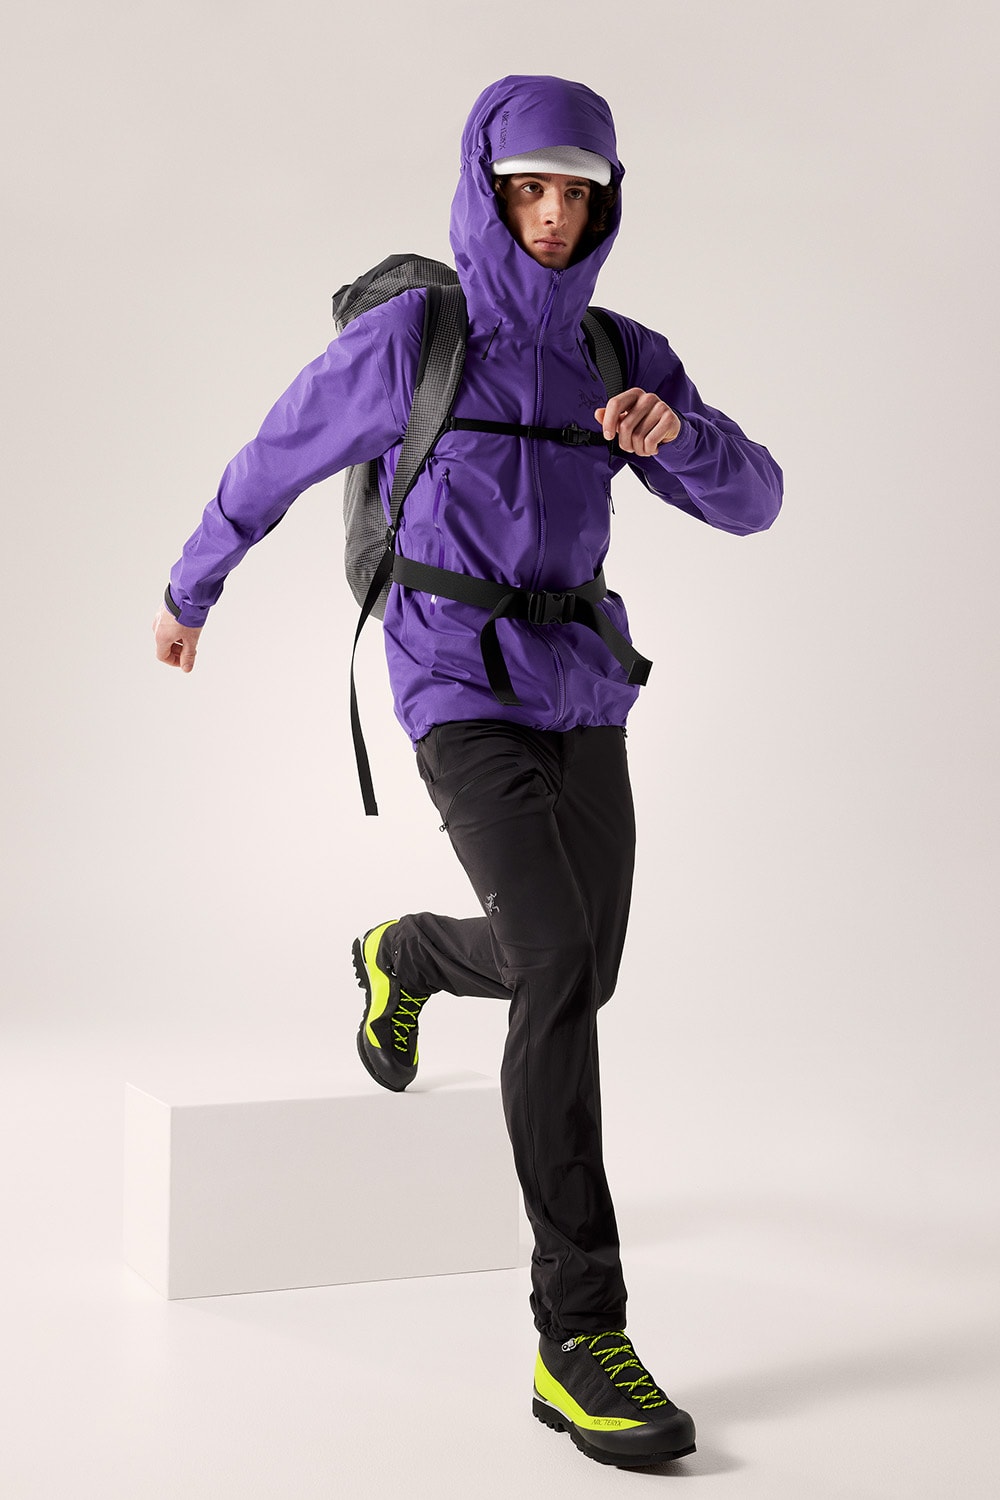 GORE-TEX Reveals New ePE Membrane: Patagonia, Arc'teryx, and More